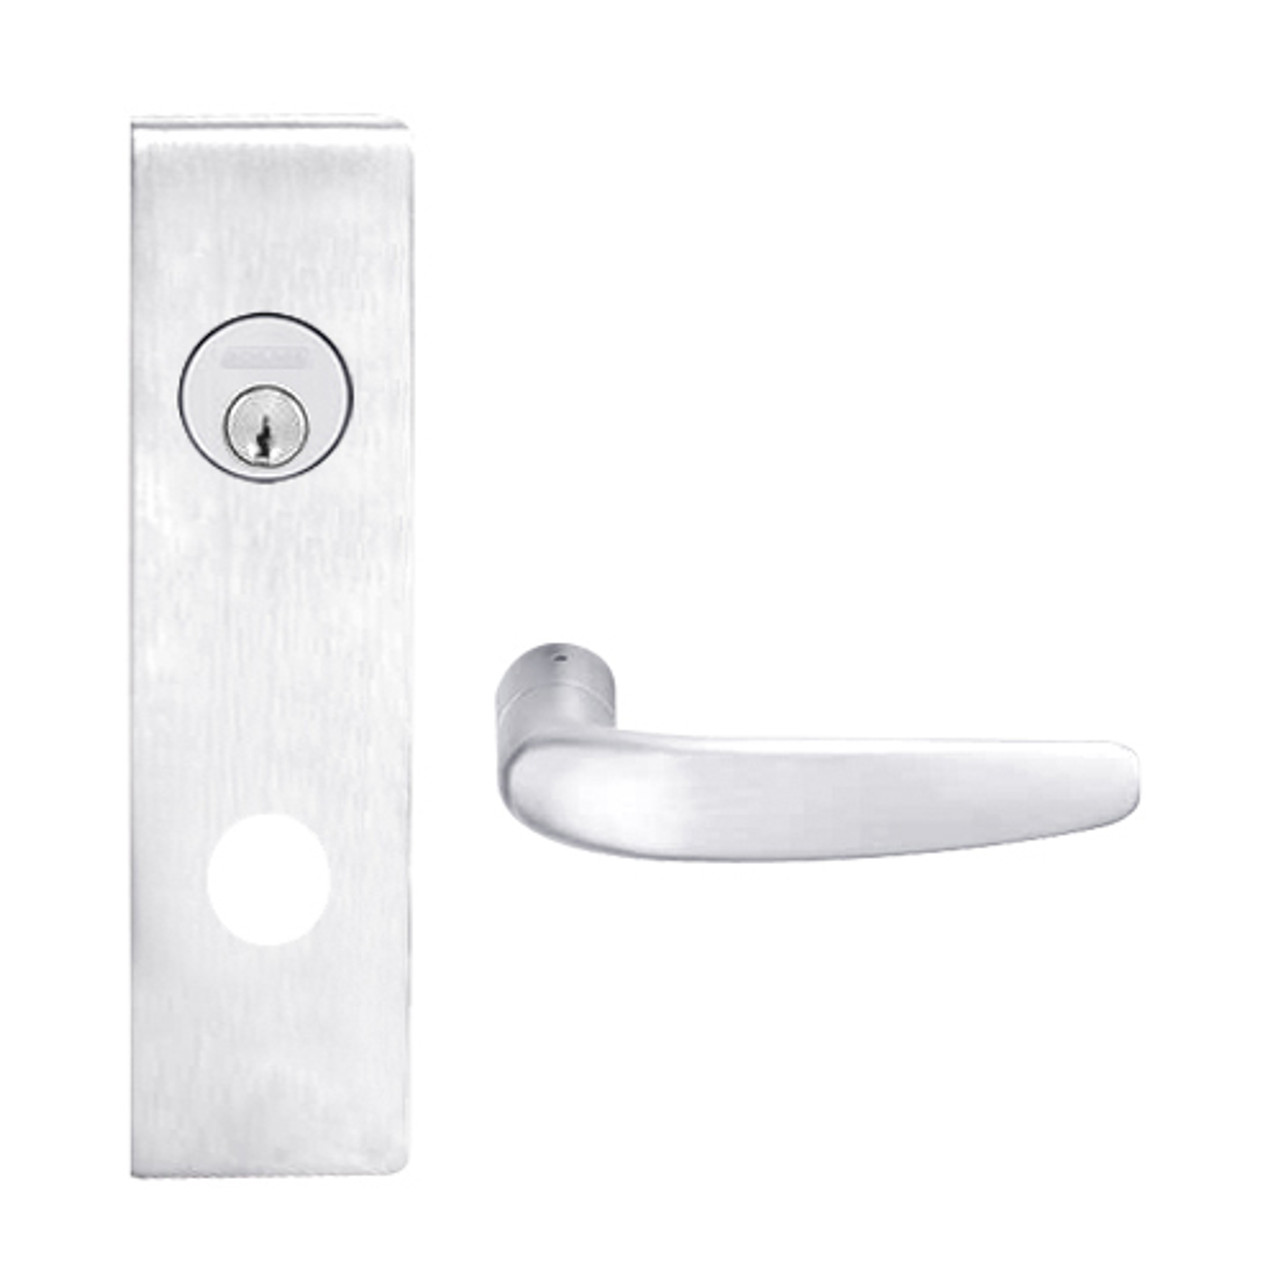 L9026P-07N-625 Schlage L Series Exit Lock with Cylinder Commercial Mortise Lock with 07 Cast Lever Design in Bright Chrome